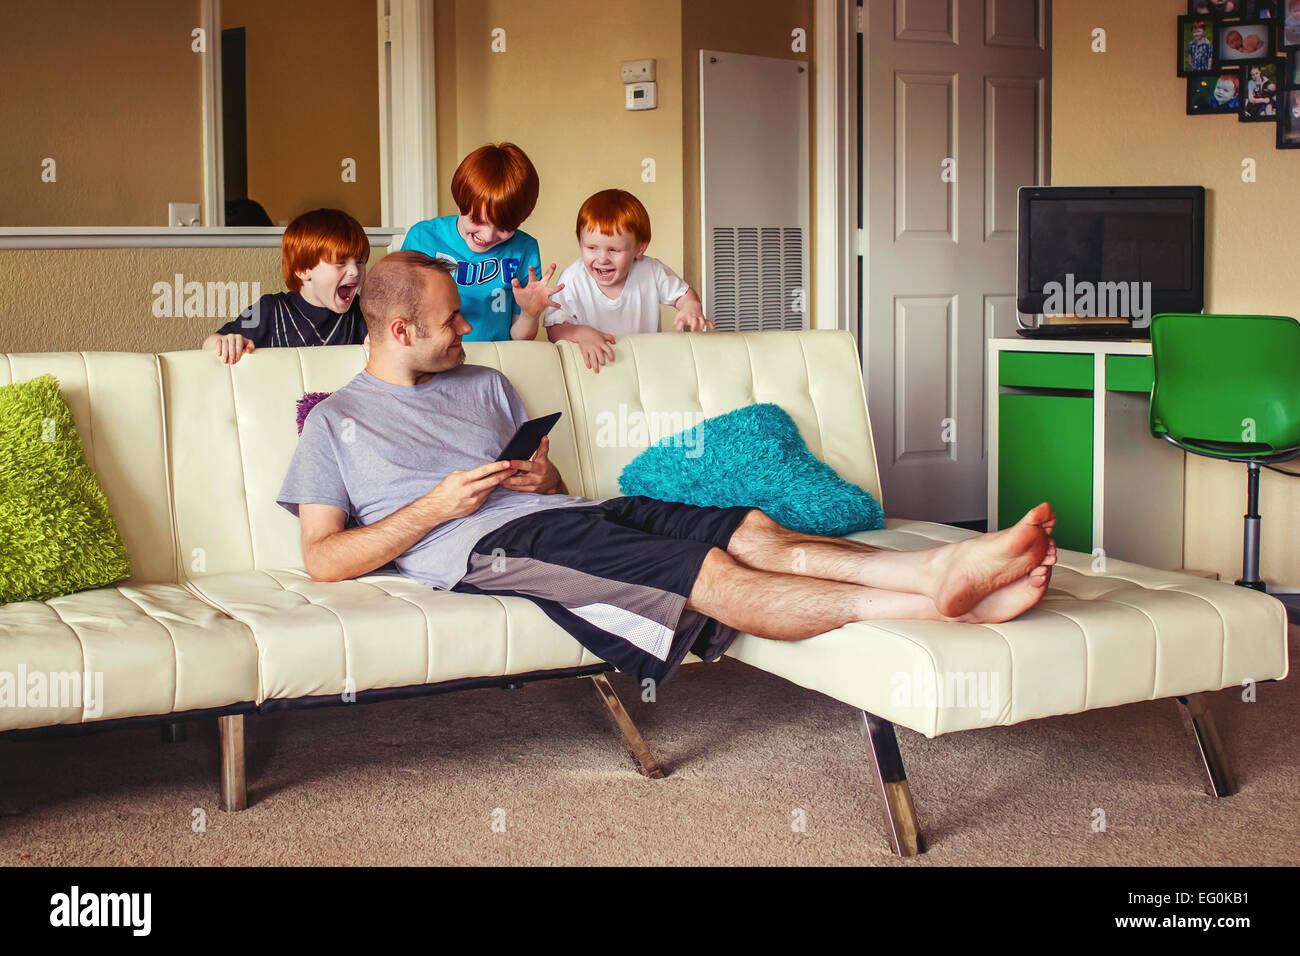 Three boys jumping out from behind a couch to surprise their father Stock Photo